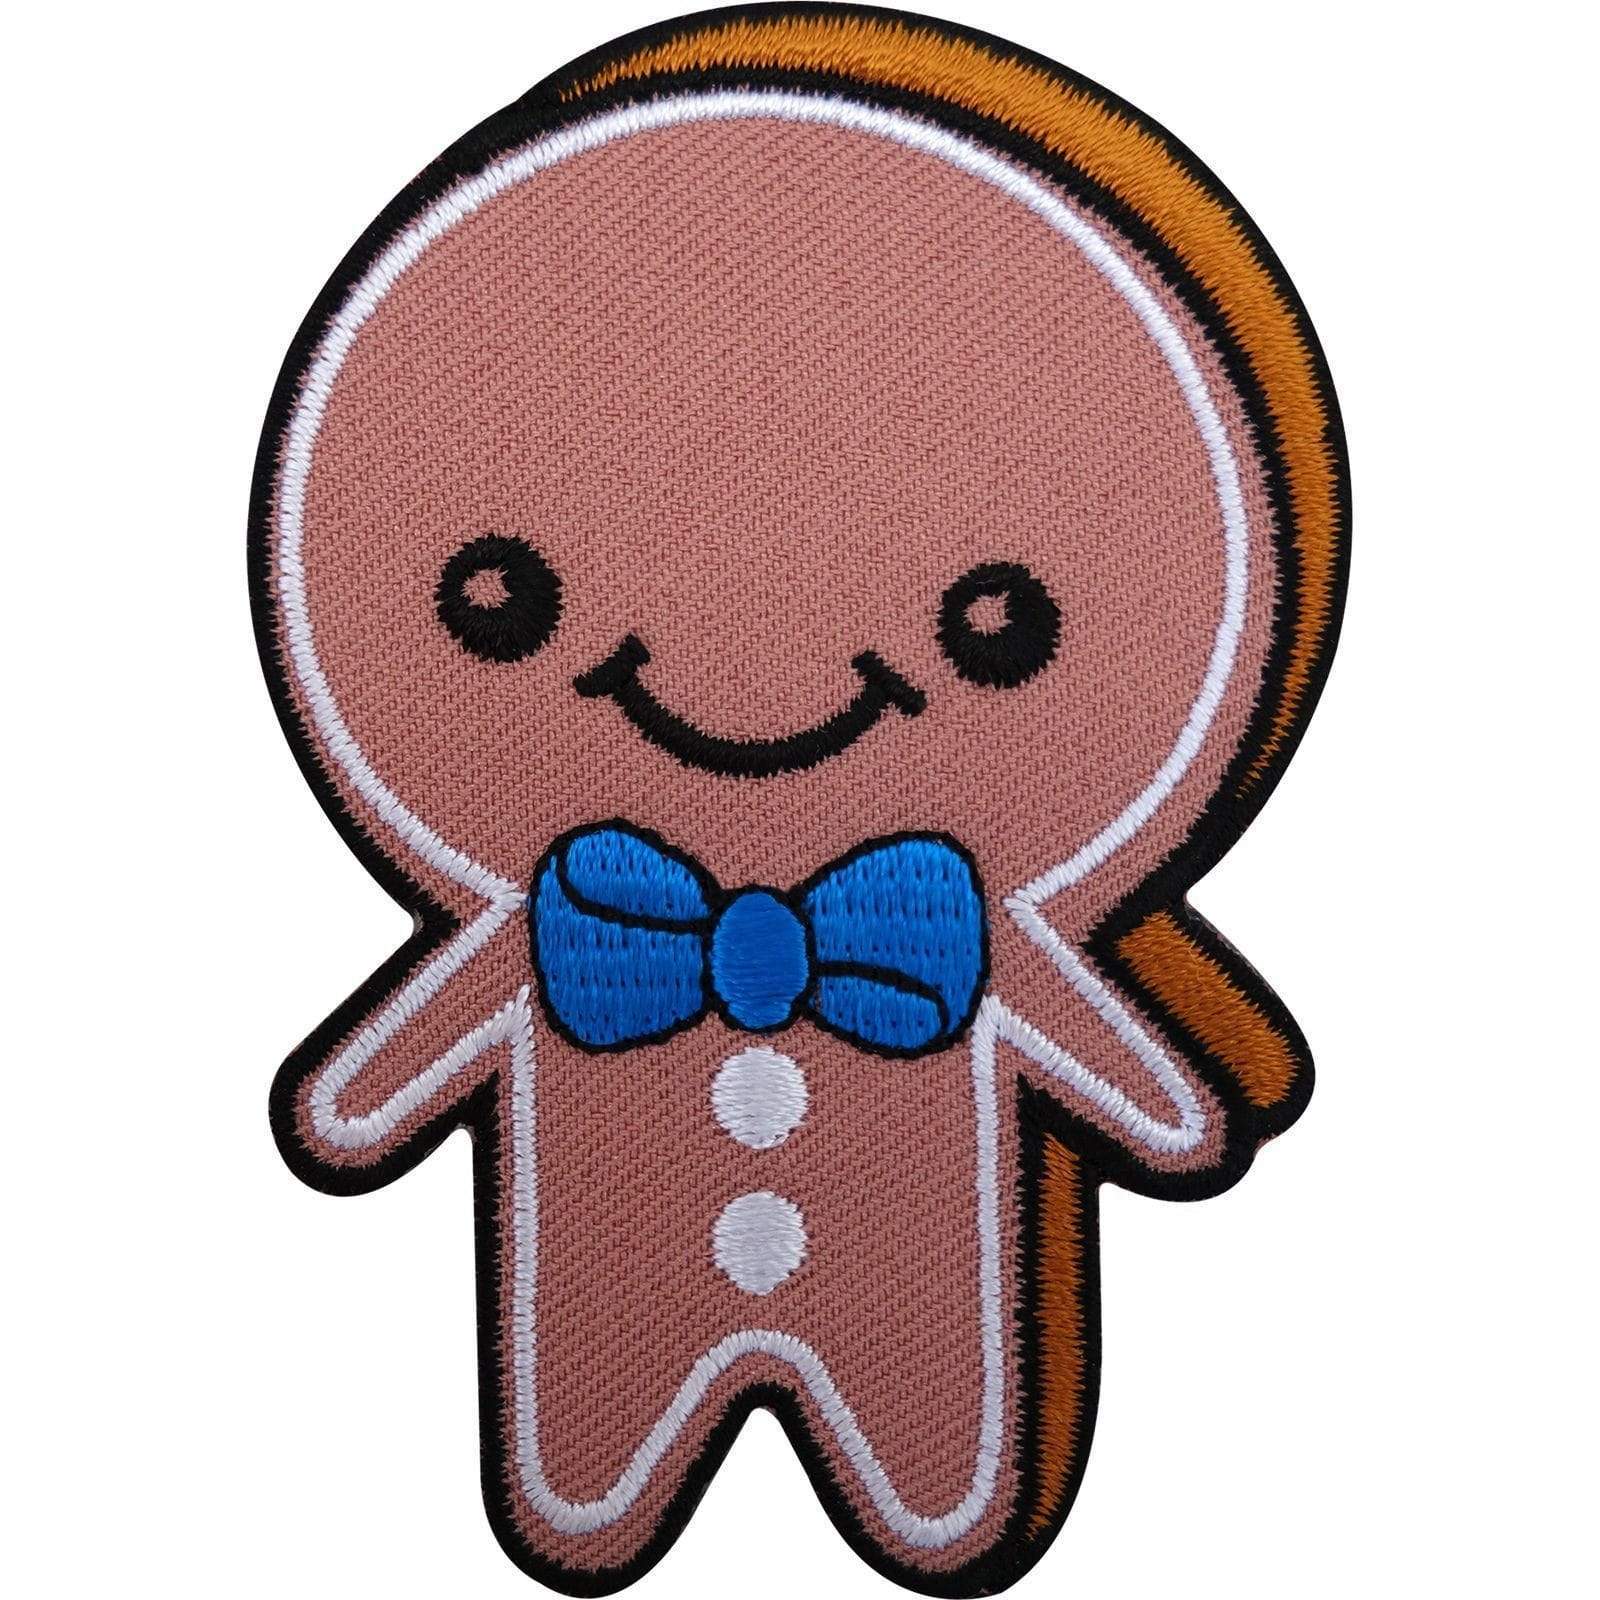 Gingerbread Man Patch Embroidered Sew On / Iron On Badge Cute Embroidery Crafts